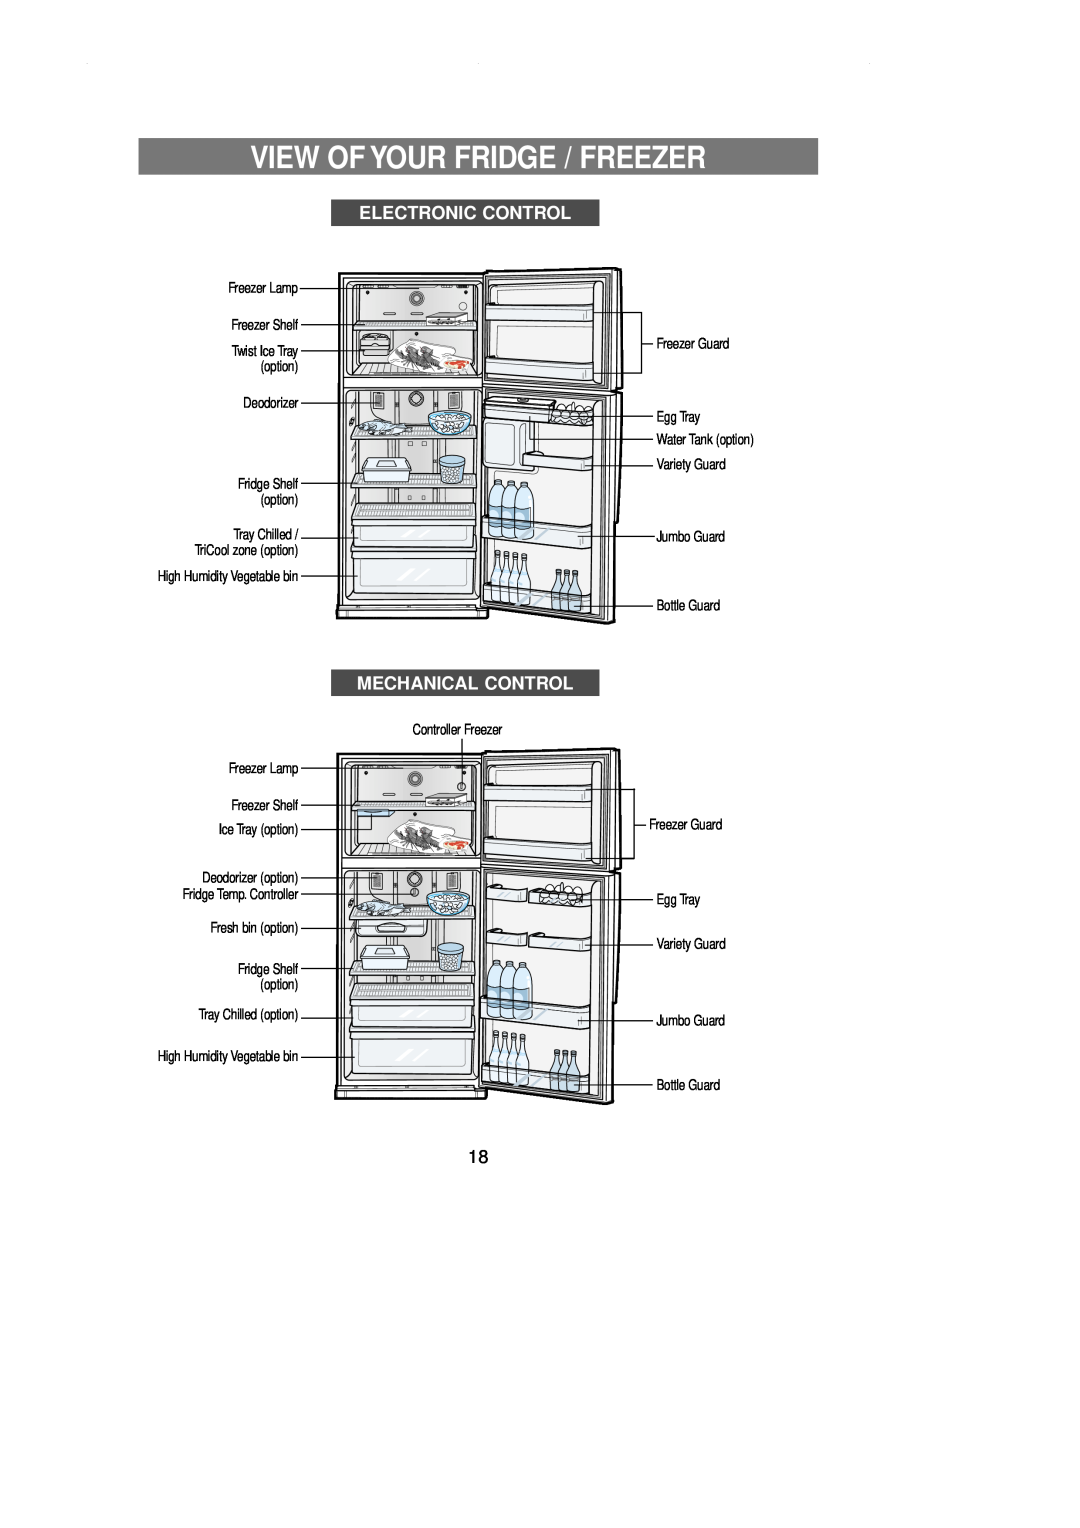 Samsung DA99-00743A owner manual View Of Your Fridge / Freezer, Electronic Control, Mechanical Control 